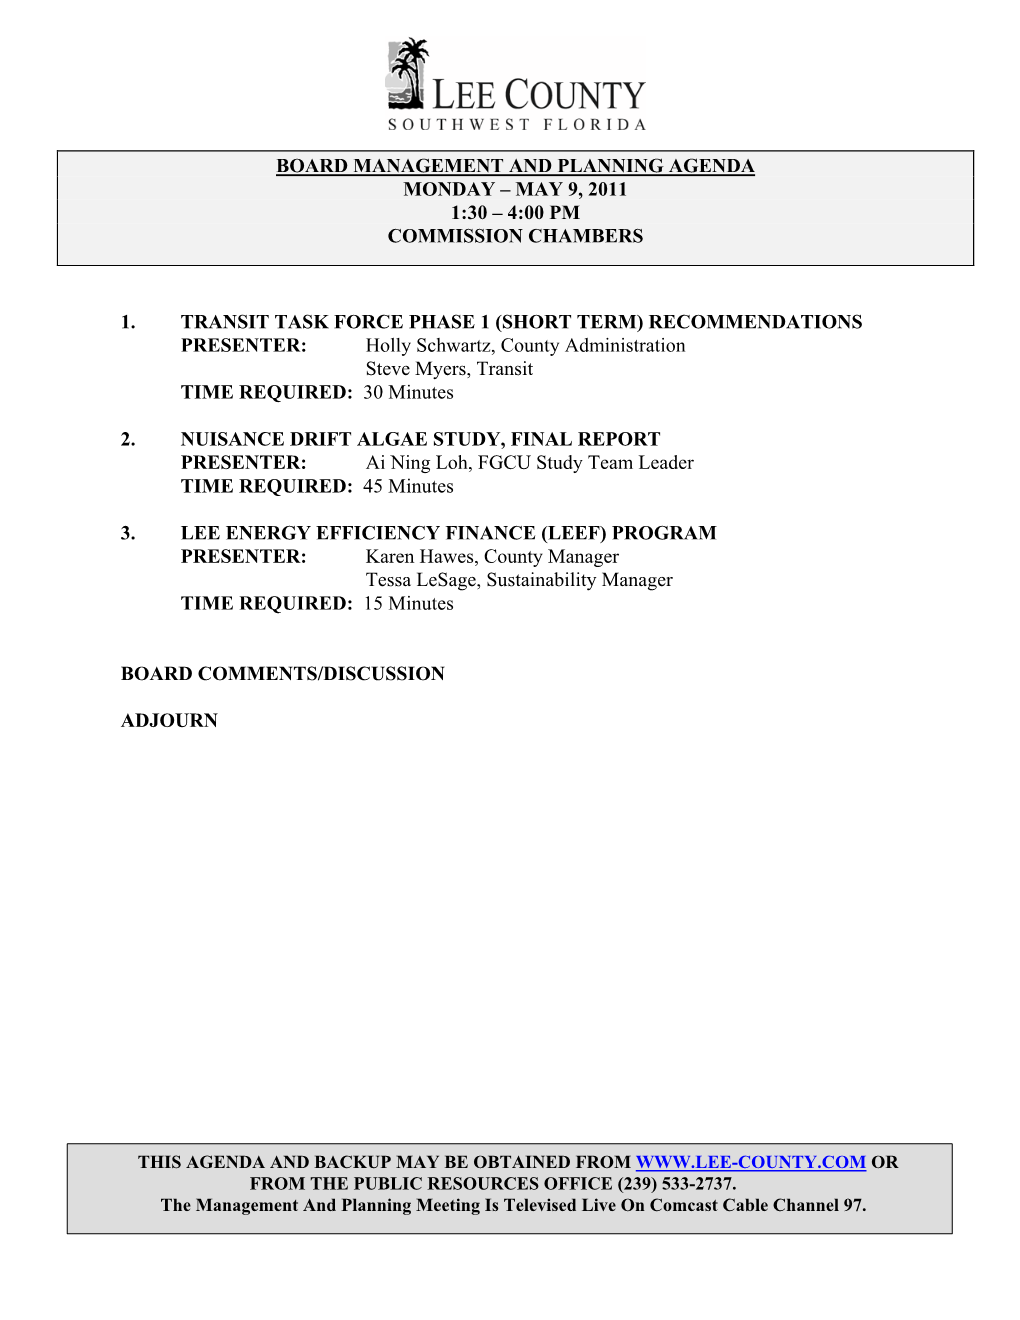 Board Management and Planning Agenda Monday – May 9, 2011 1:30 – 4:00 Pm Commission Chambers